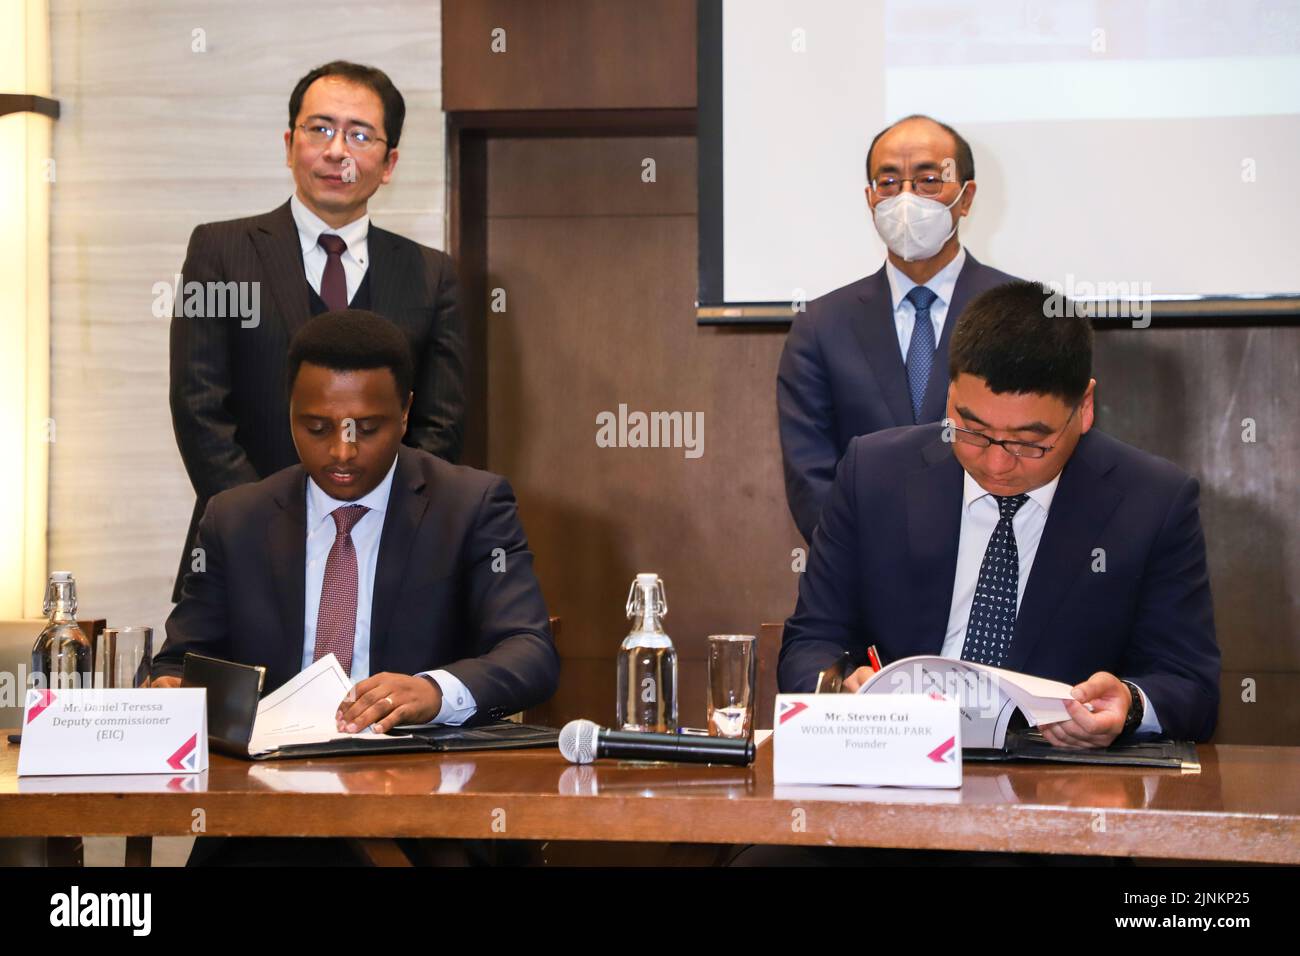 Addis Ababa, Ethiopia. 10th Aug, 2022. Representatives from the Ethiopian Investment Commission (EIC) and China's WODA Metal Industry Private Limited Company (PLC) sign an agreement in Addis Ababa, Ethiopia, on Aug. 10, 2022. The Ethiopian Investment Commission (EIC) on Wednesday signed an agreement with China's WODA Metal Industry Private Limited Company (PLC) and its partners to build an industrial park in Ethiopia. Credit: Michael Tewelde/Xinhua/Alamy Live News Stock Photo